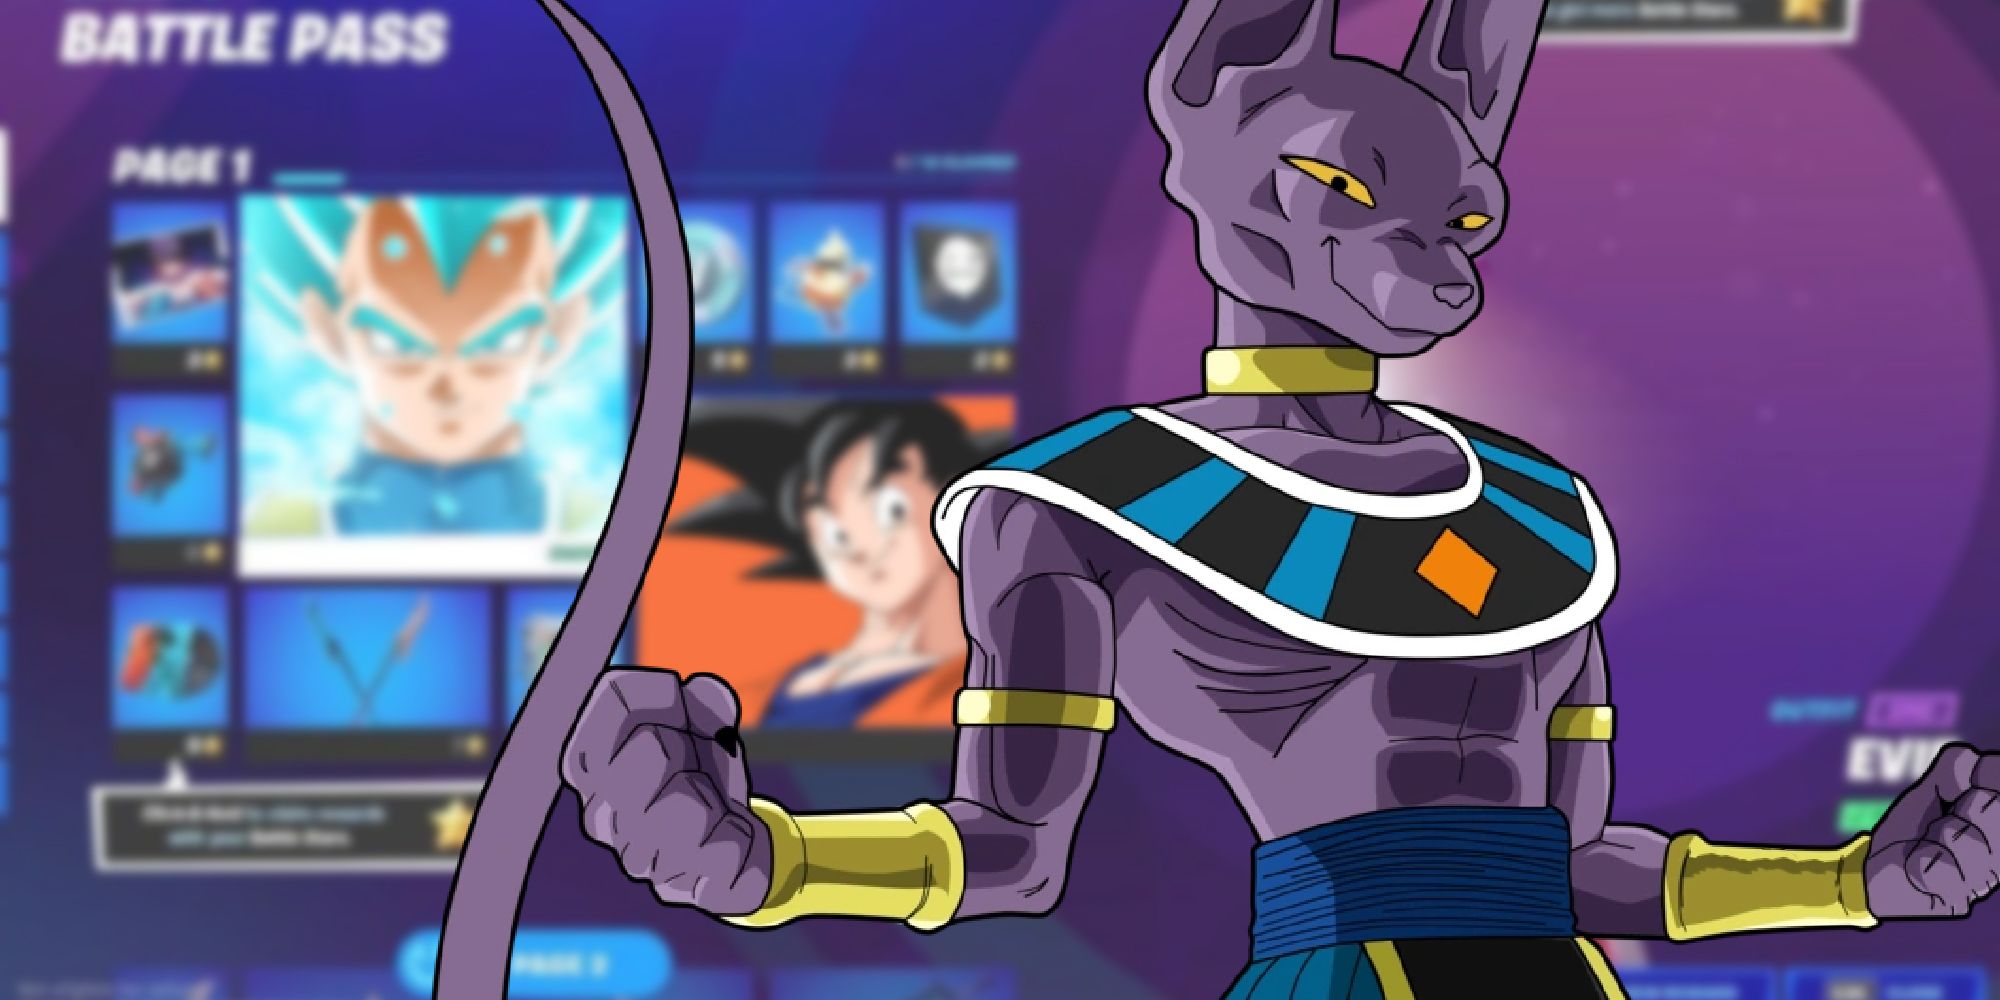 Dragon Ball Characters Are Coming To Fortnite According To Leakers